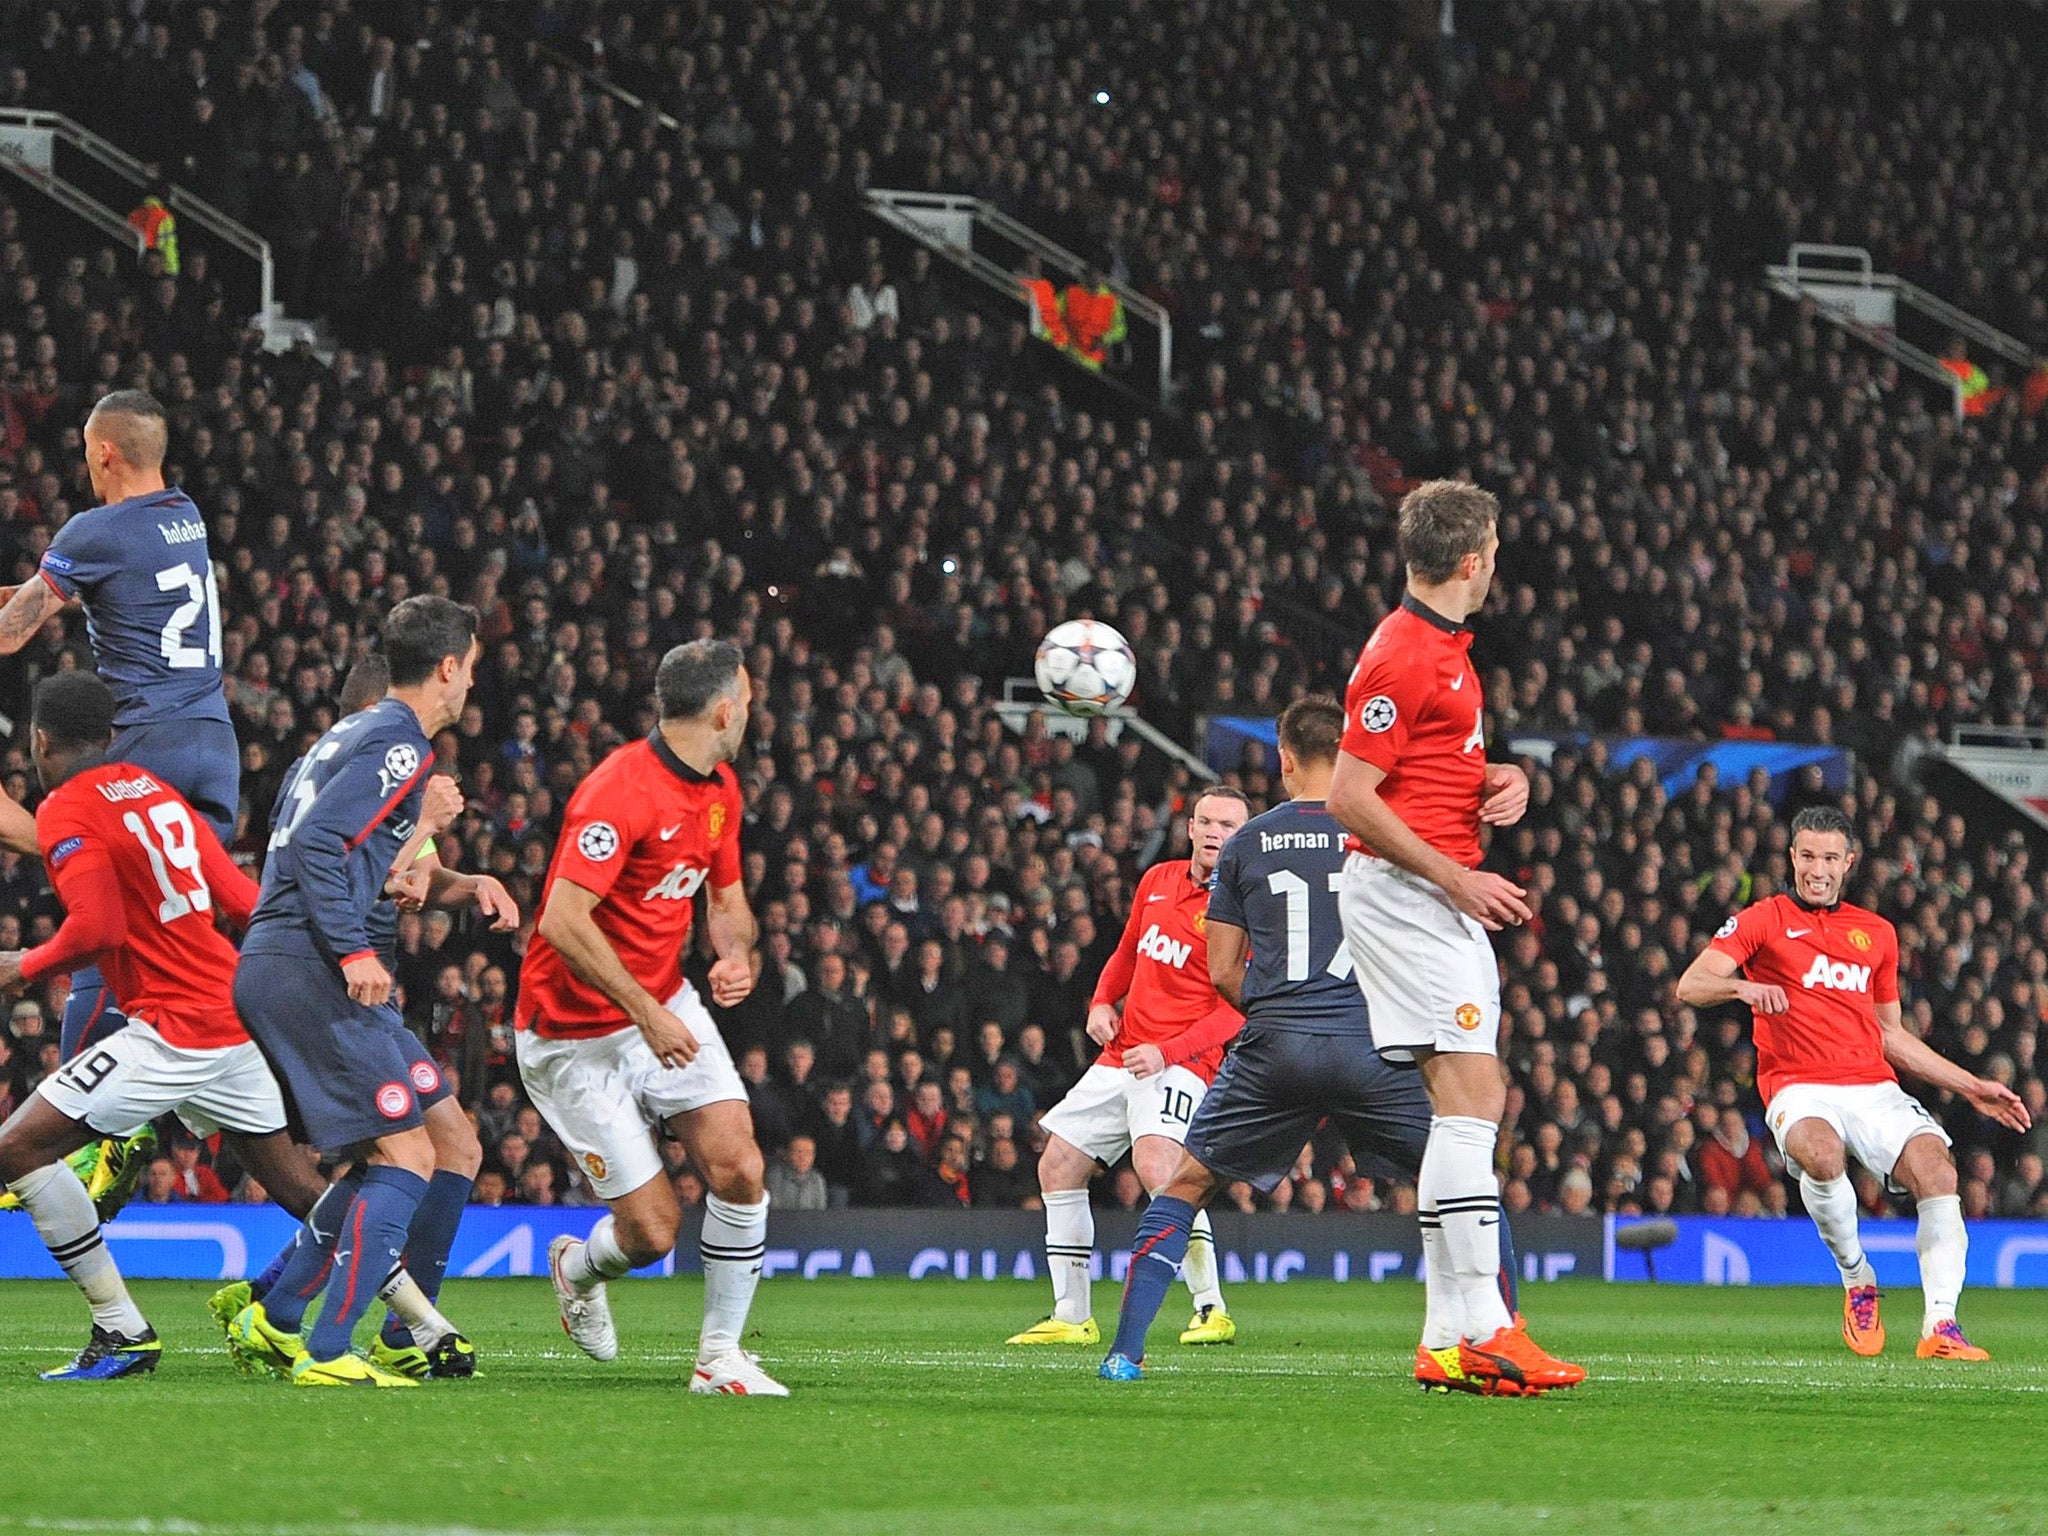 Robin van Persie completes his hat-trick by scoring from a free-kick